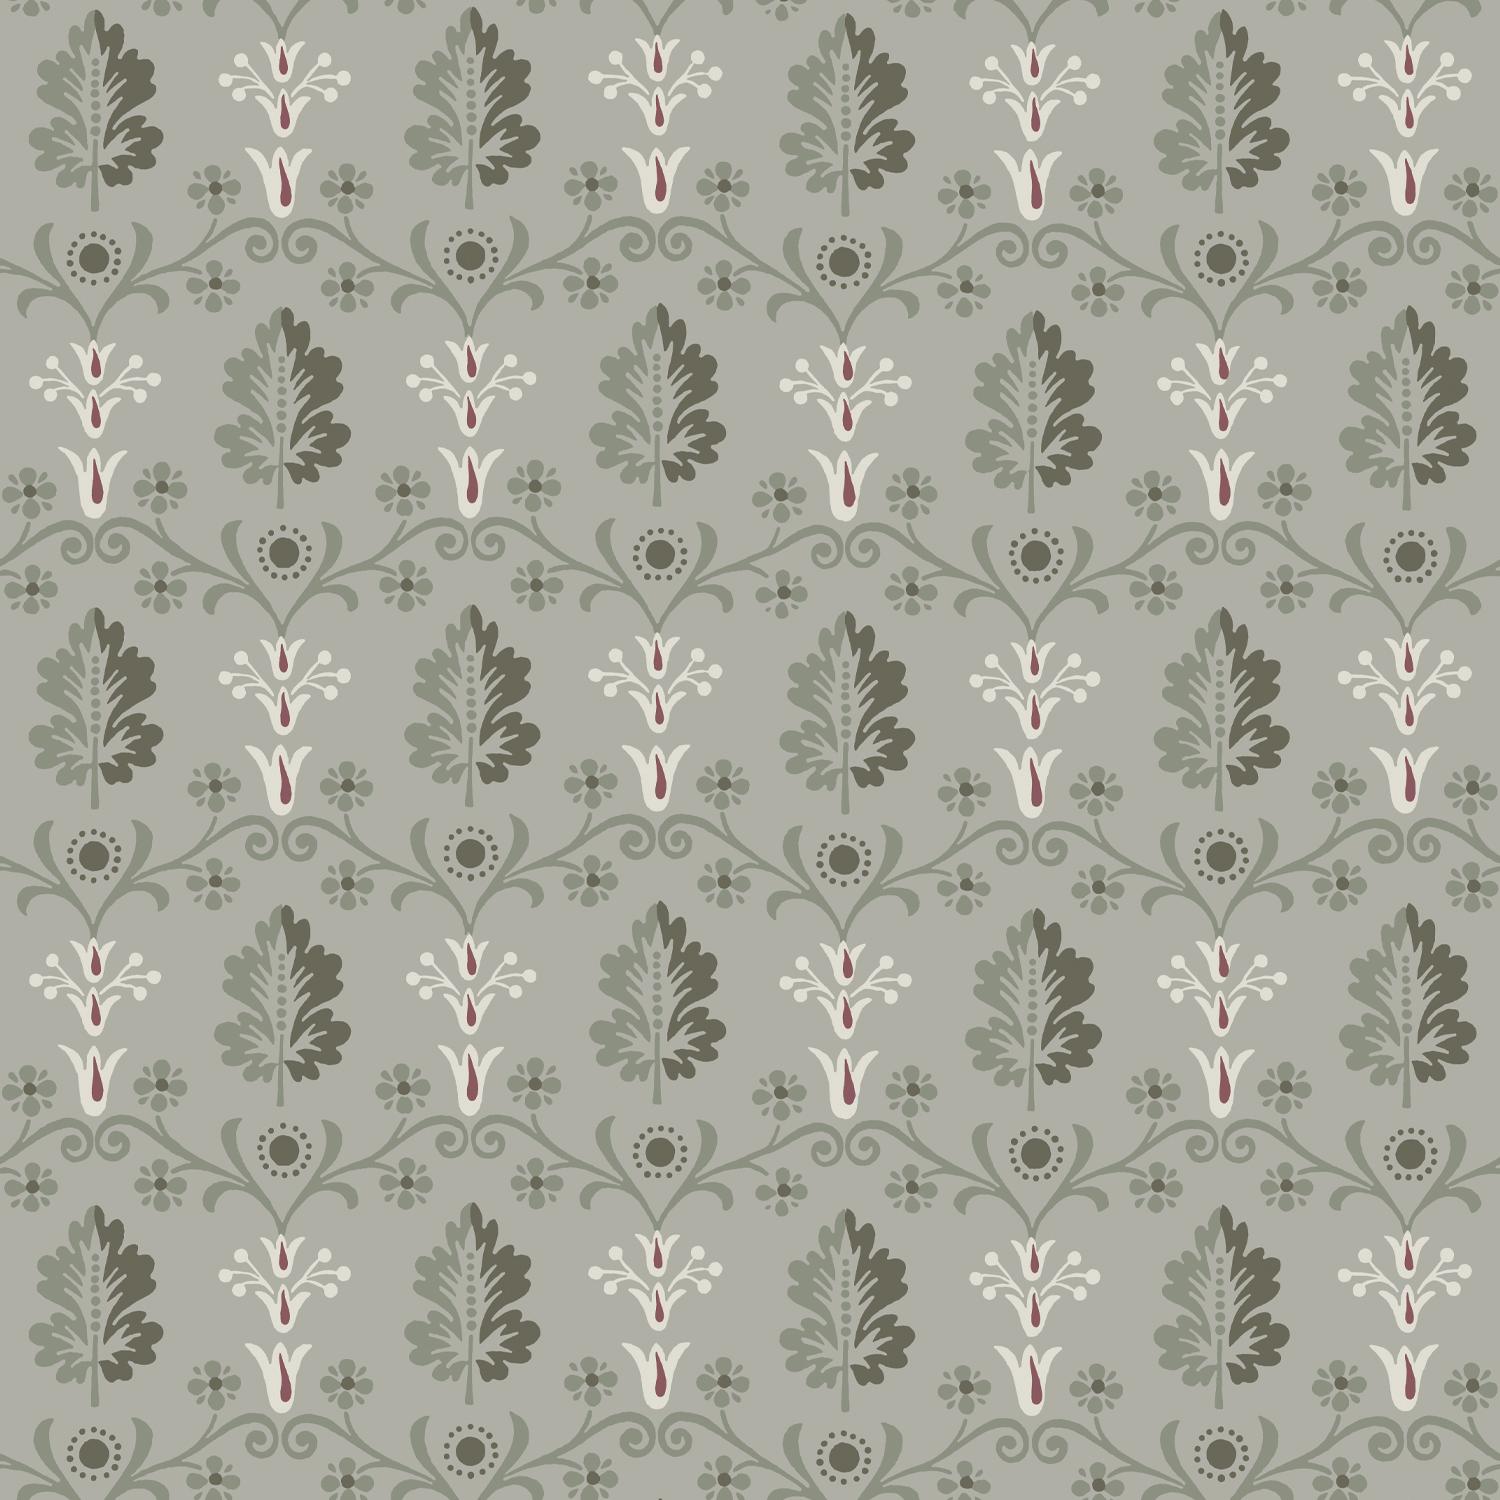 Repeat: 28 cm / 11 in

Founded in 2019, the French wallpaper brand Papier Francais is defined by the rediscovery, restoration, and revival of iconic wallpapers dating back to the French “Golden Age of wallpaper” of the 18th and 19th centuries.